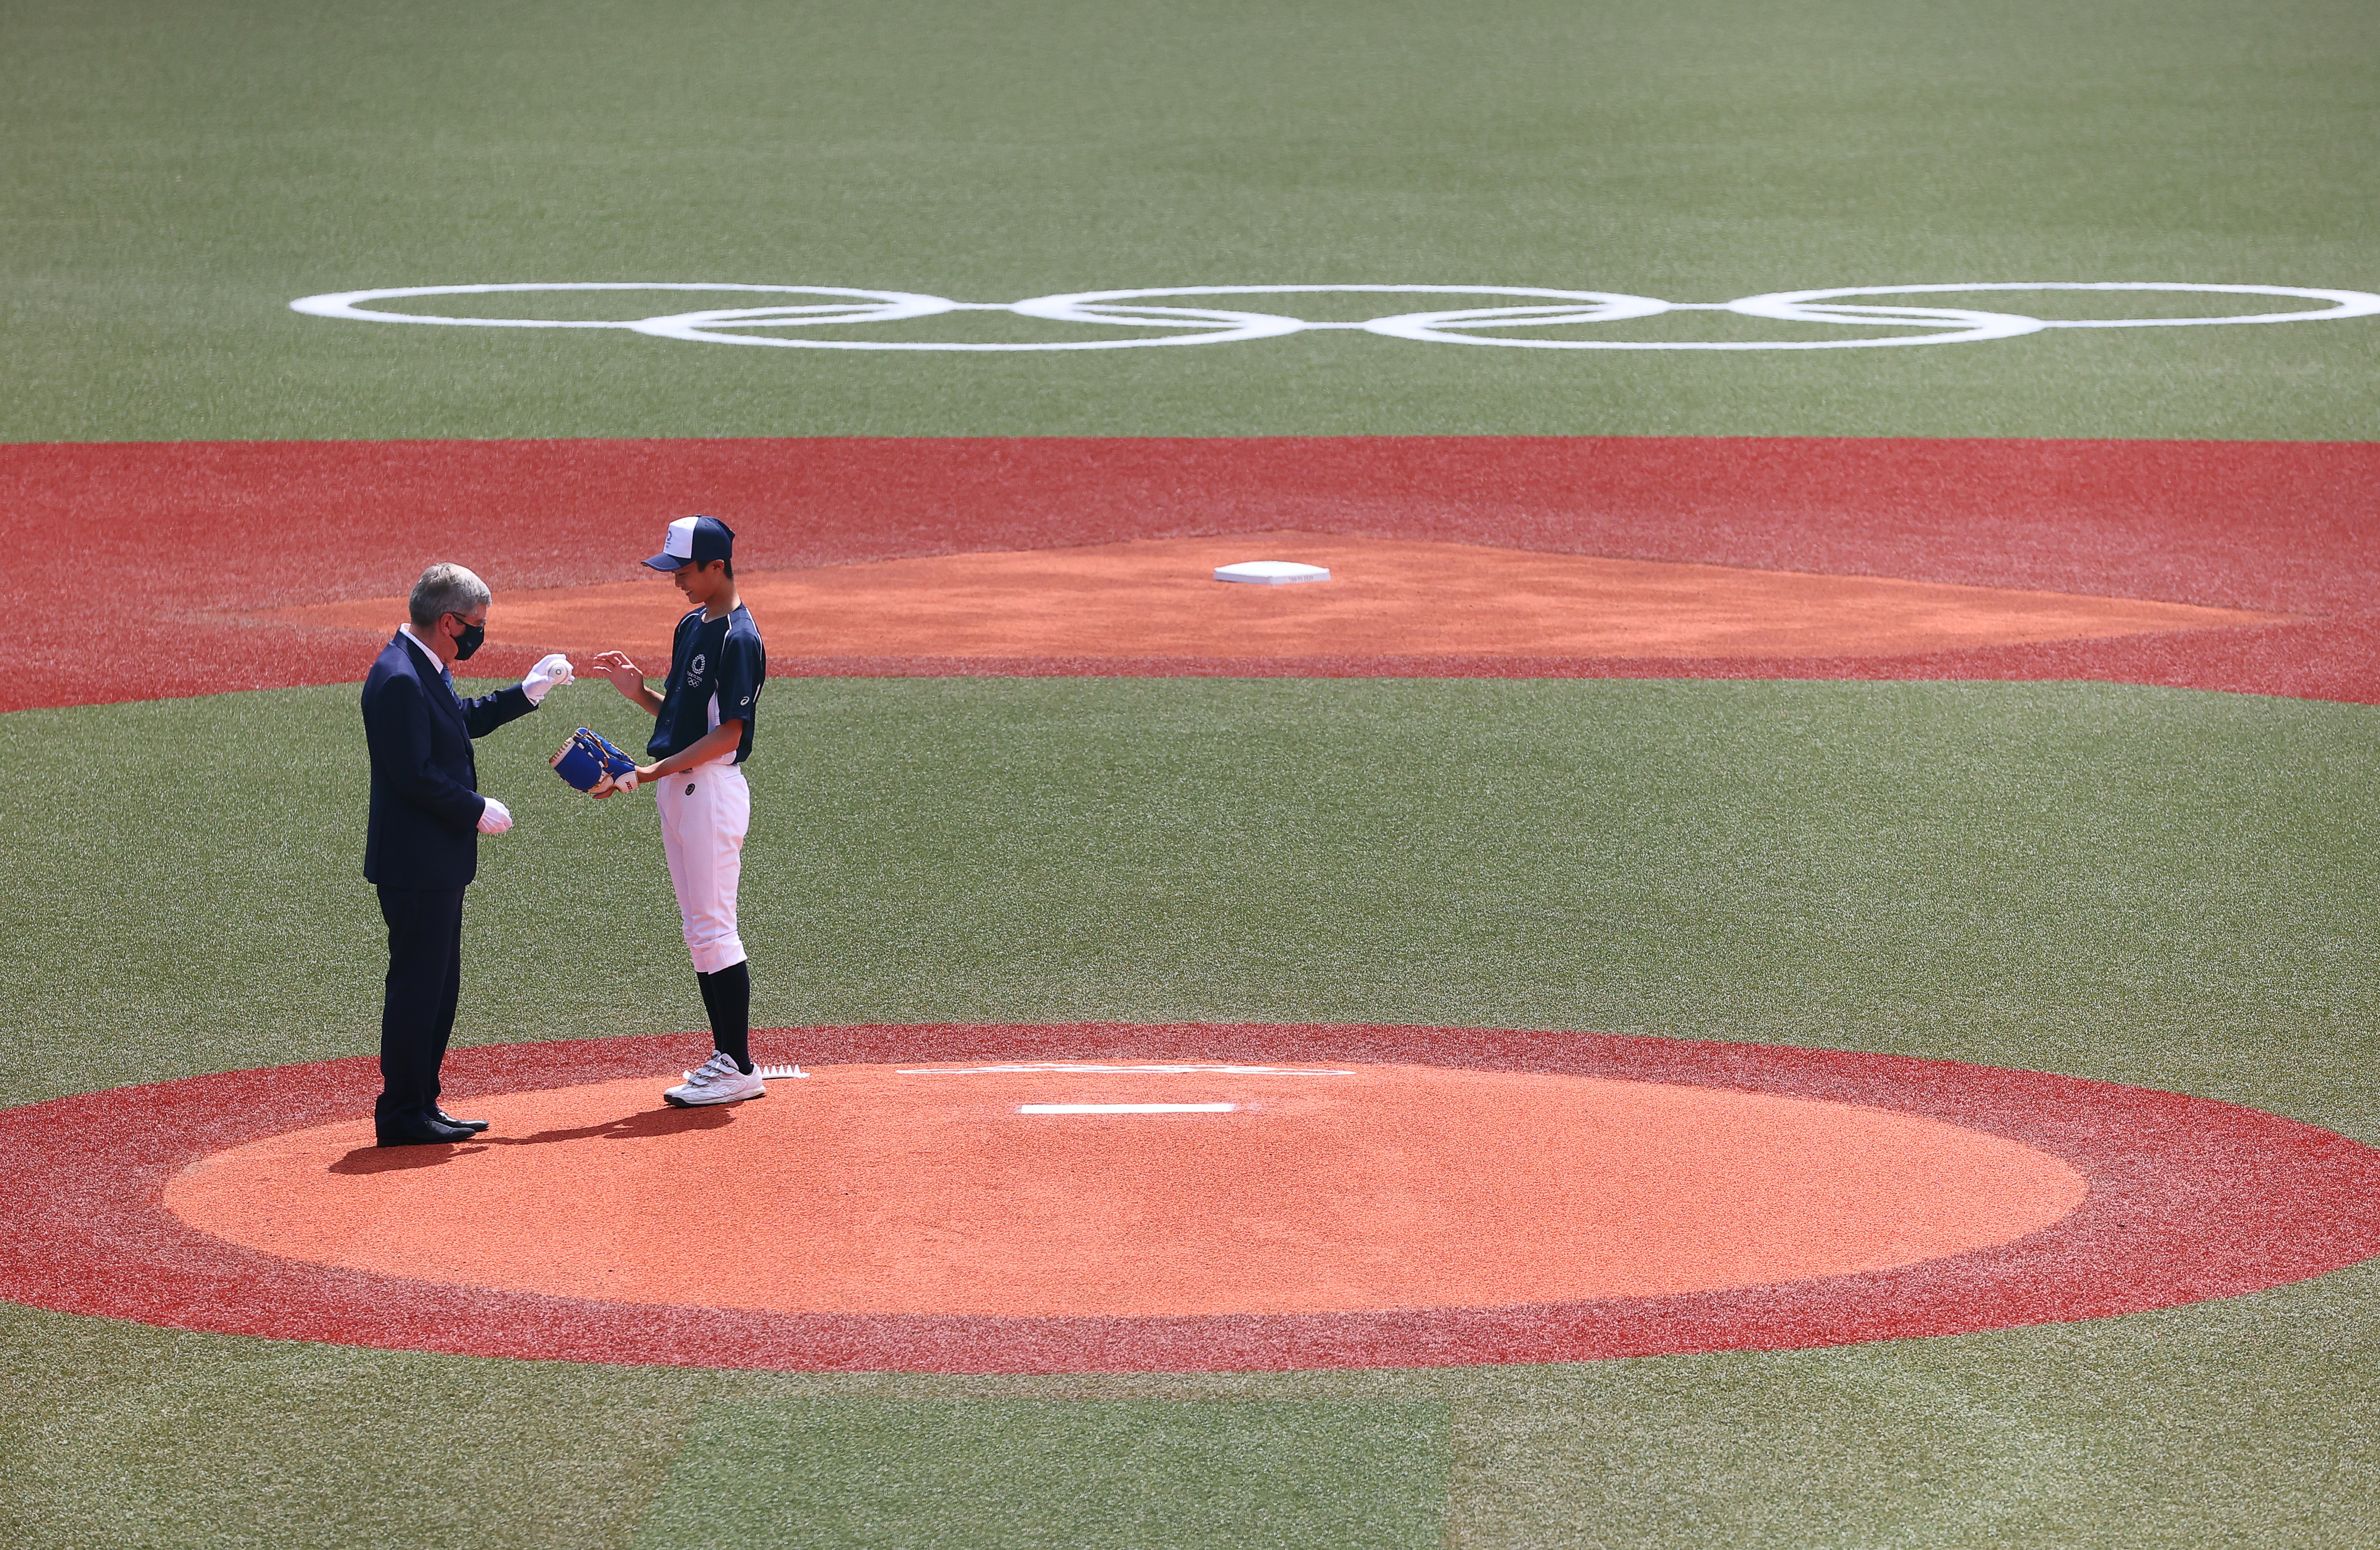 Tokyo 2020 Olympics - Baseball - Men - Opening Round - Group A - Dominican Republic v Japan - Fukushima Azuma Baseball Stadium, Fukushima, Japan – July 28, 2021. International Olympic Commission (IOC) President Thomas Bach hands a ball to a Japanese student to take the first pitch. REUTERS/Jorge Silva